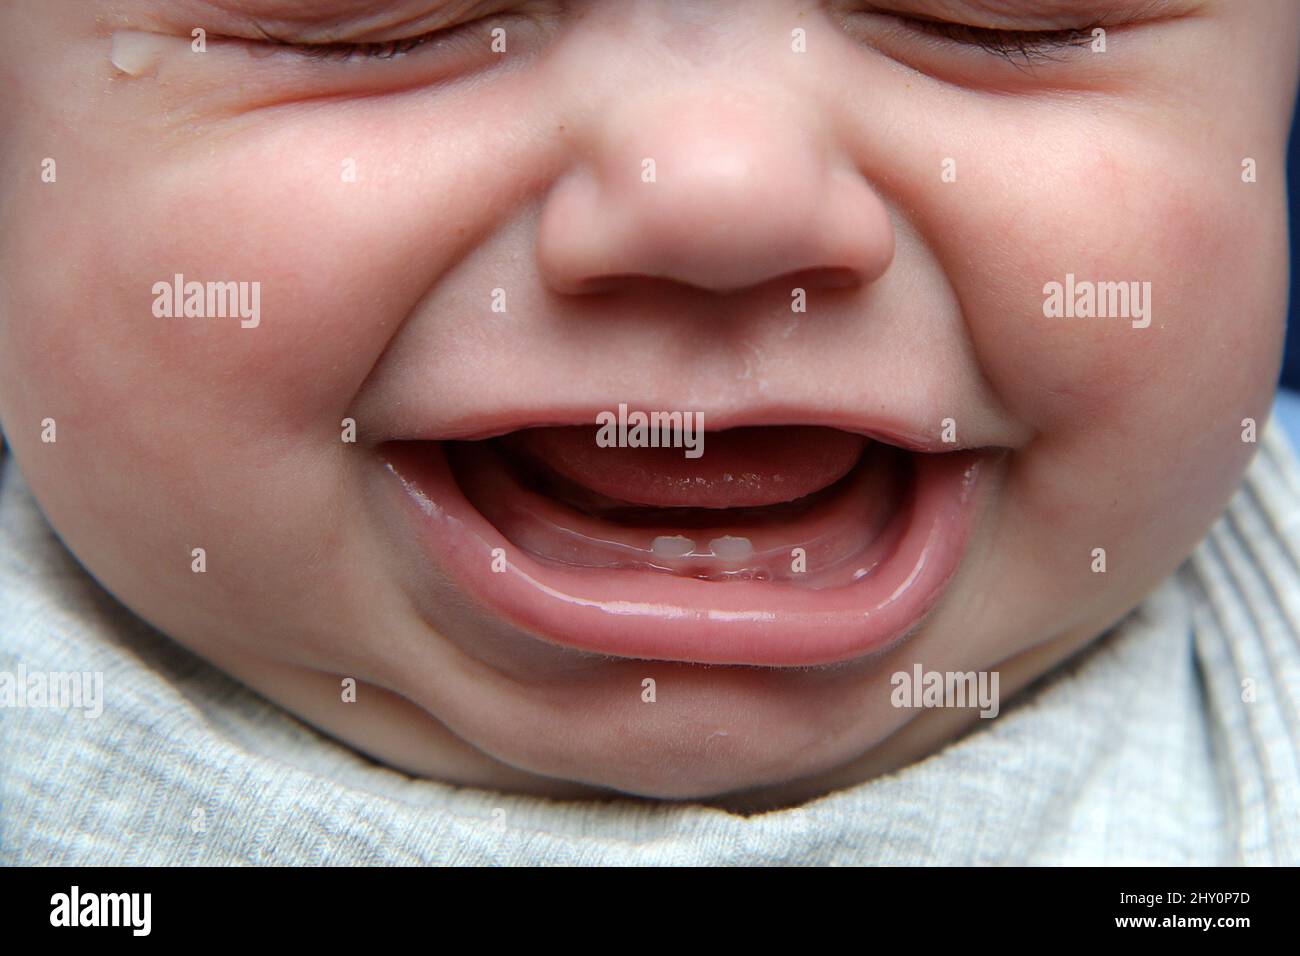 The detail of the mouth of a baby with a couple of first teeth. It is crying, as the gum and teeth are painful. Stock Photo